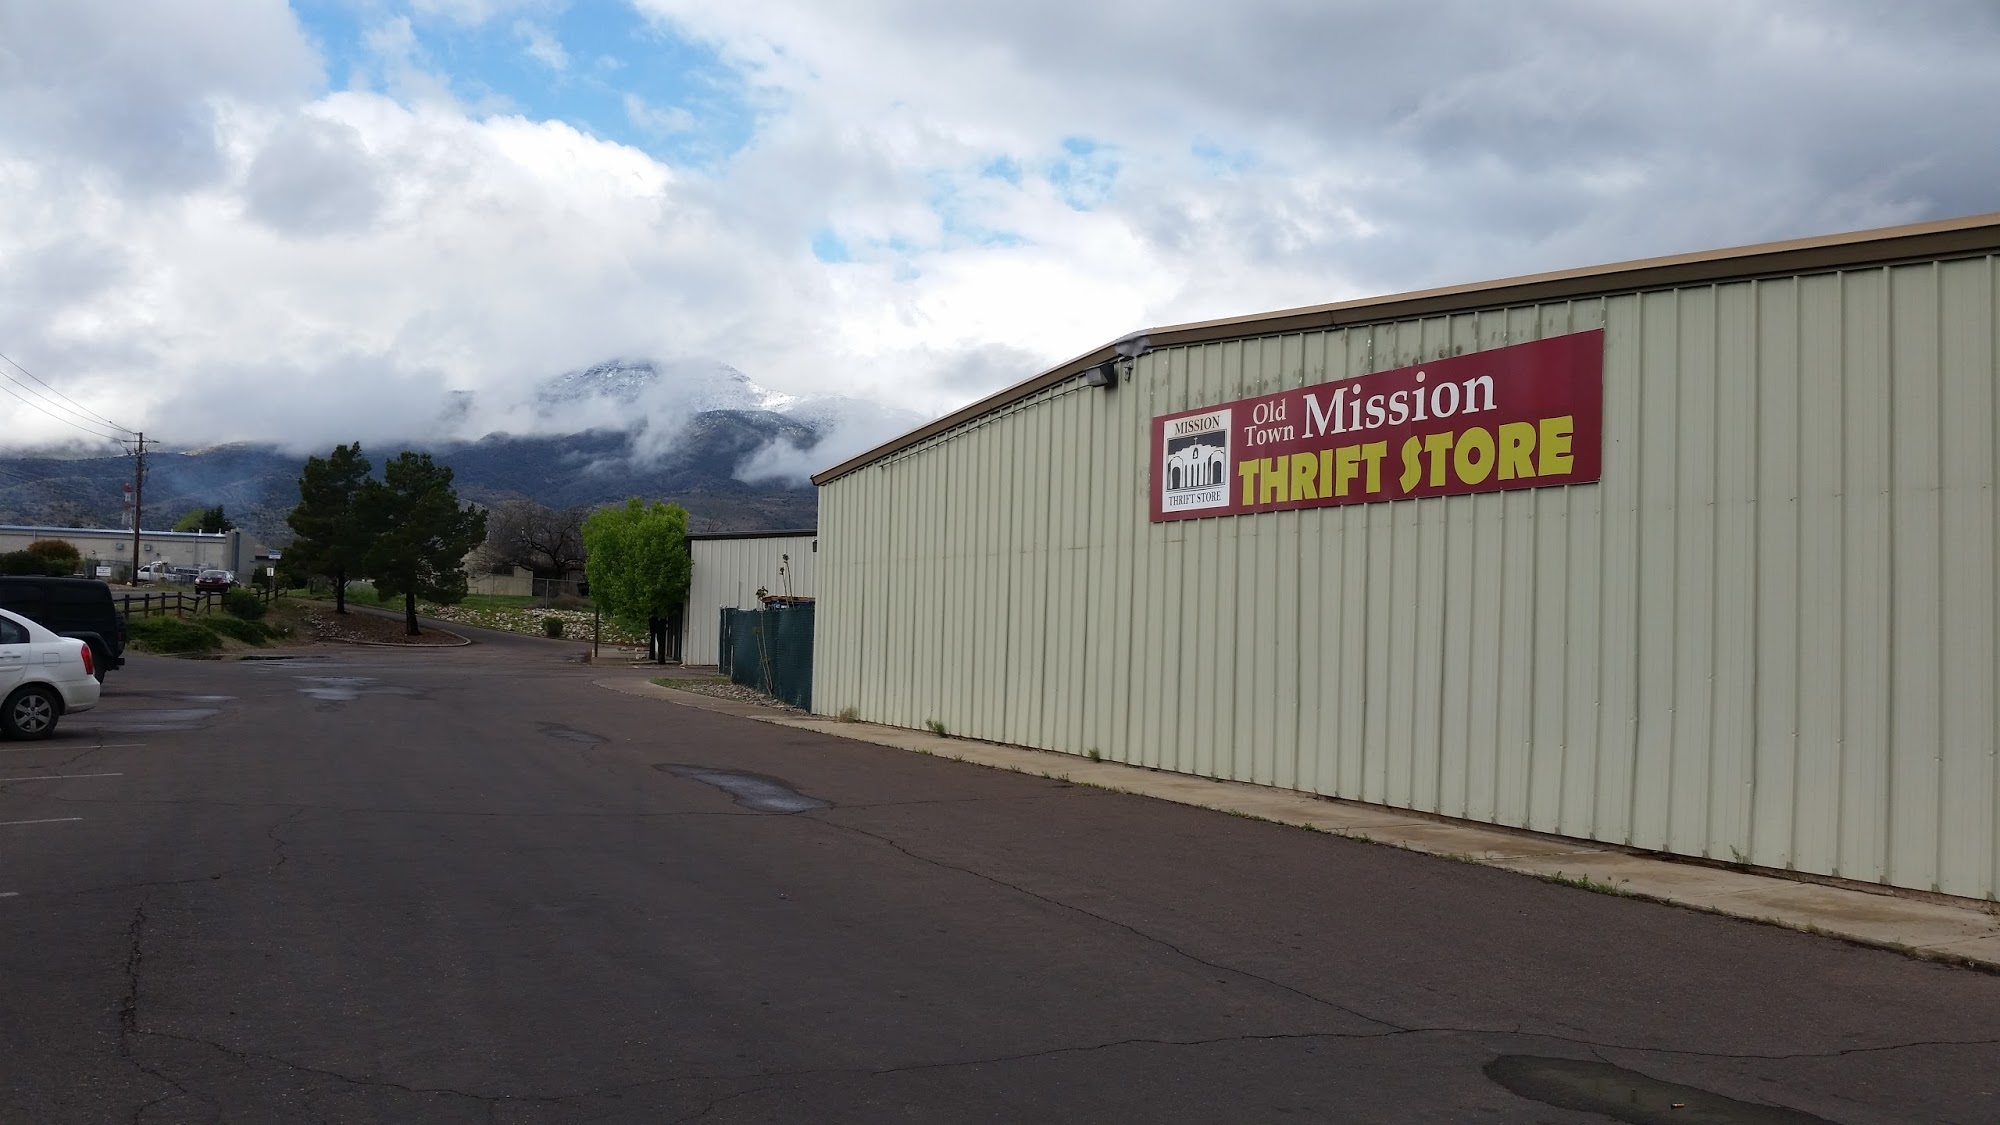 Old Town Mission Thrift Store